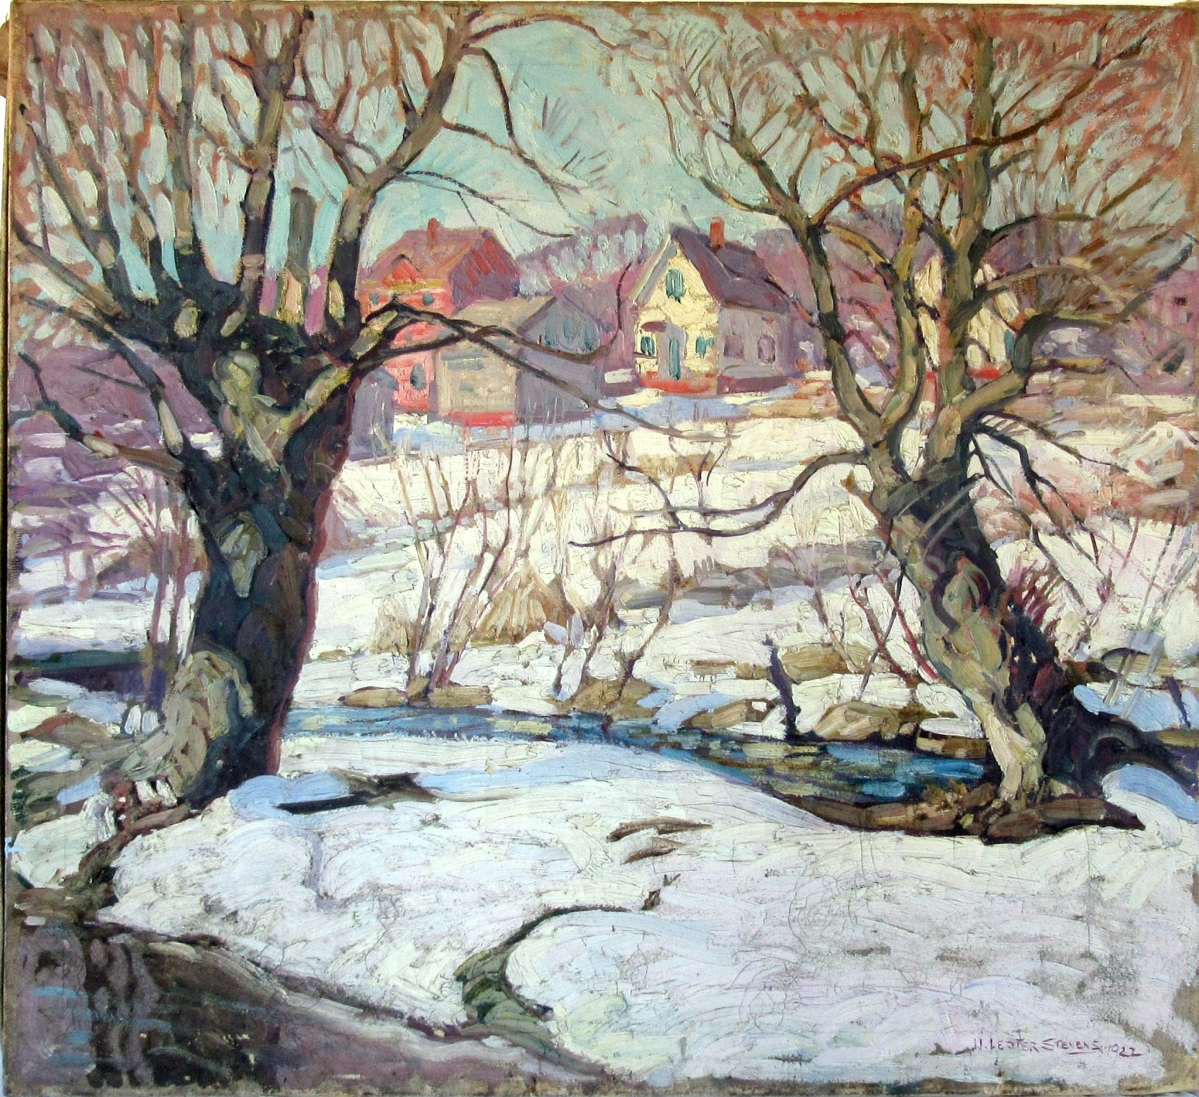 The highest priced painting of the sale was a winter landscape signed by W. Lester Stevens and dated 1922. The painting, which needed to be cleaned, started off with an internet bid of $3,200, and it finished at $6,490.